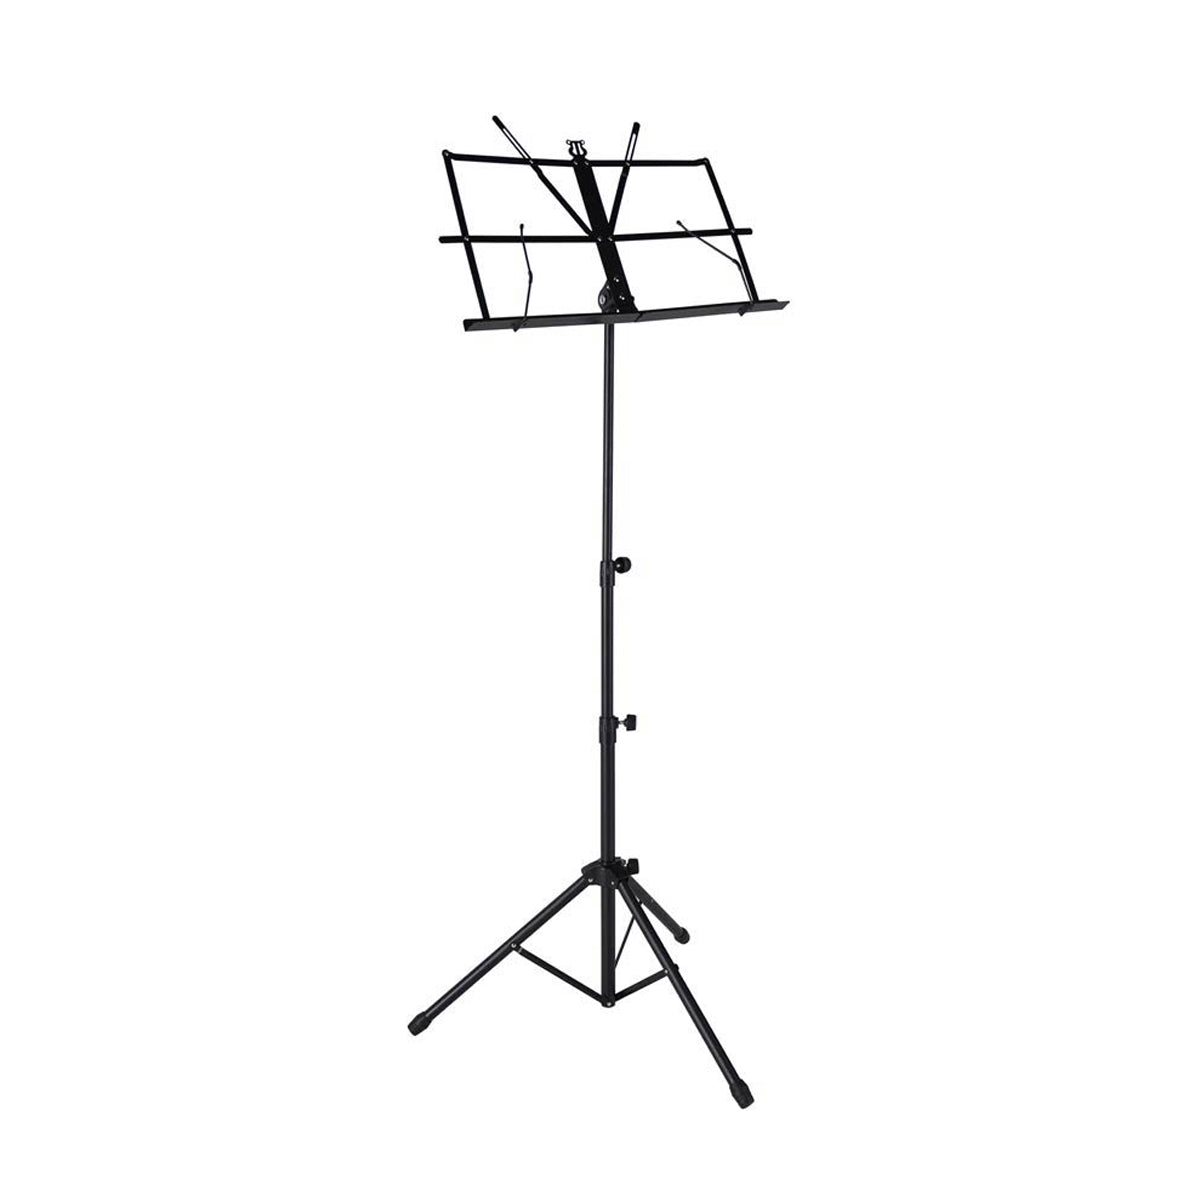 Boston MS-40 Foldable Music Stand with Bag